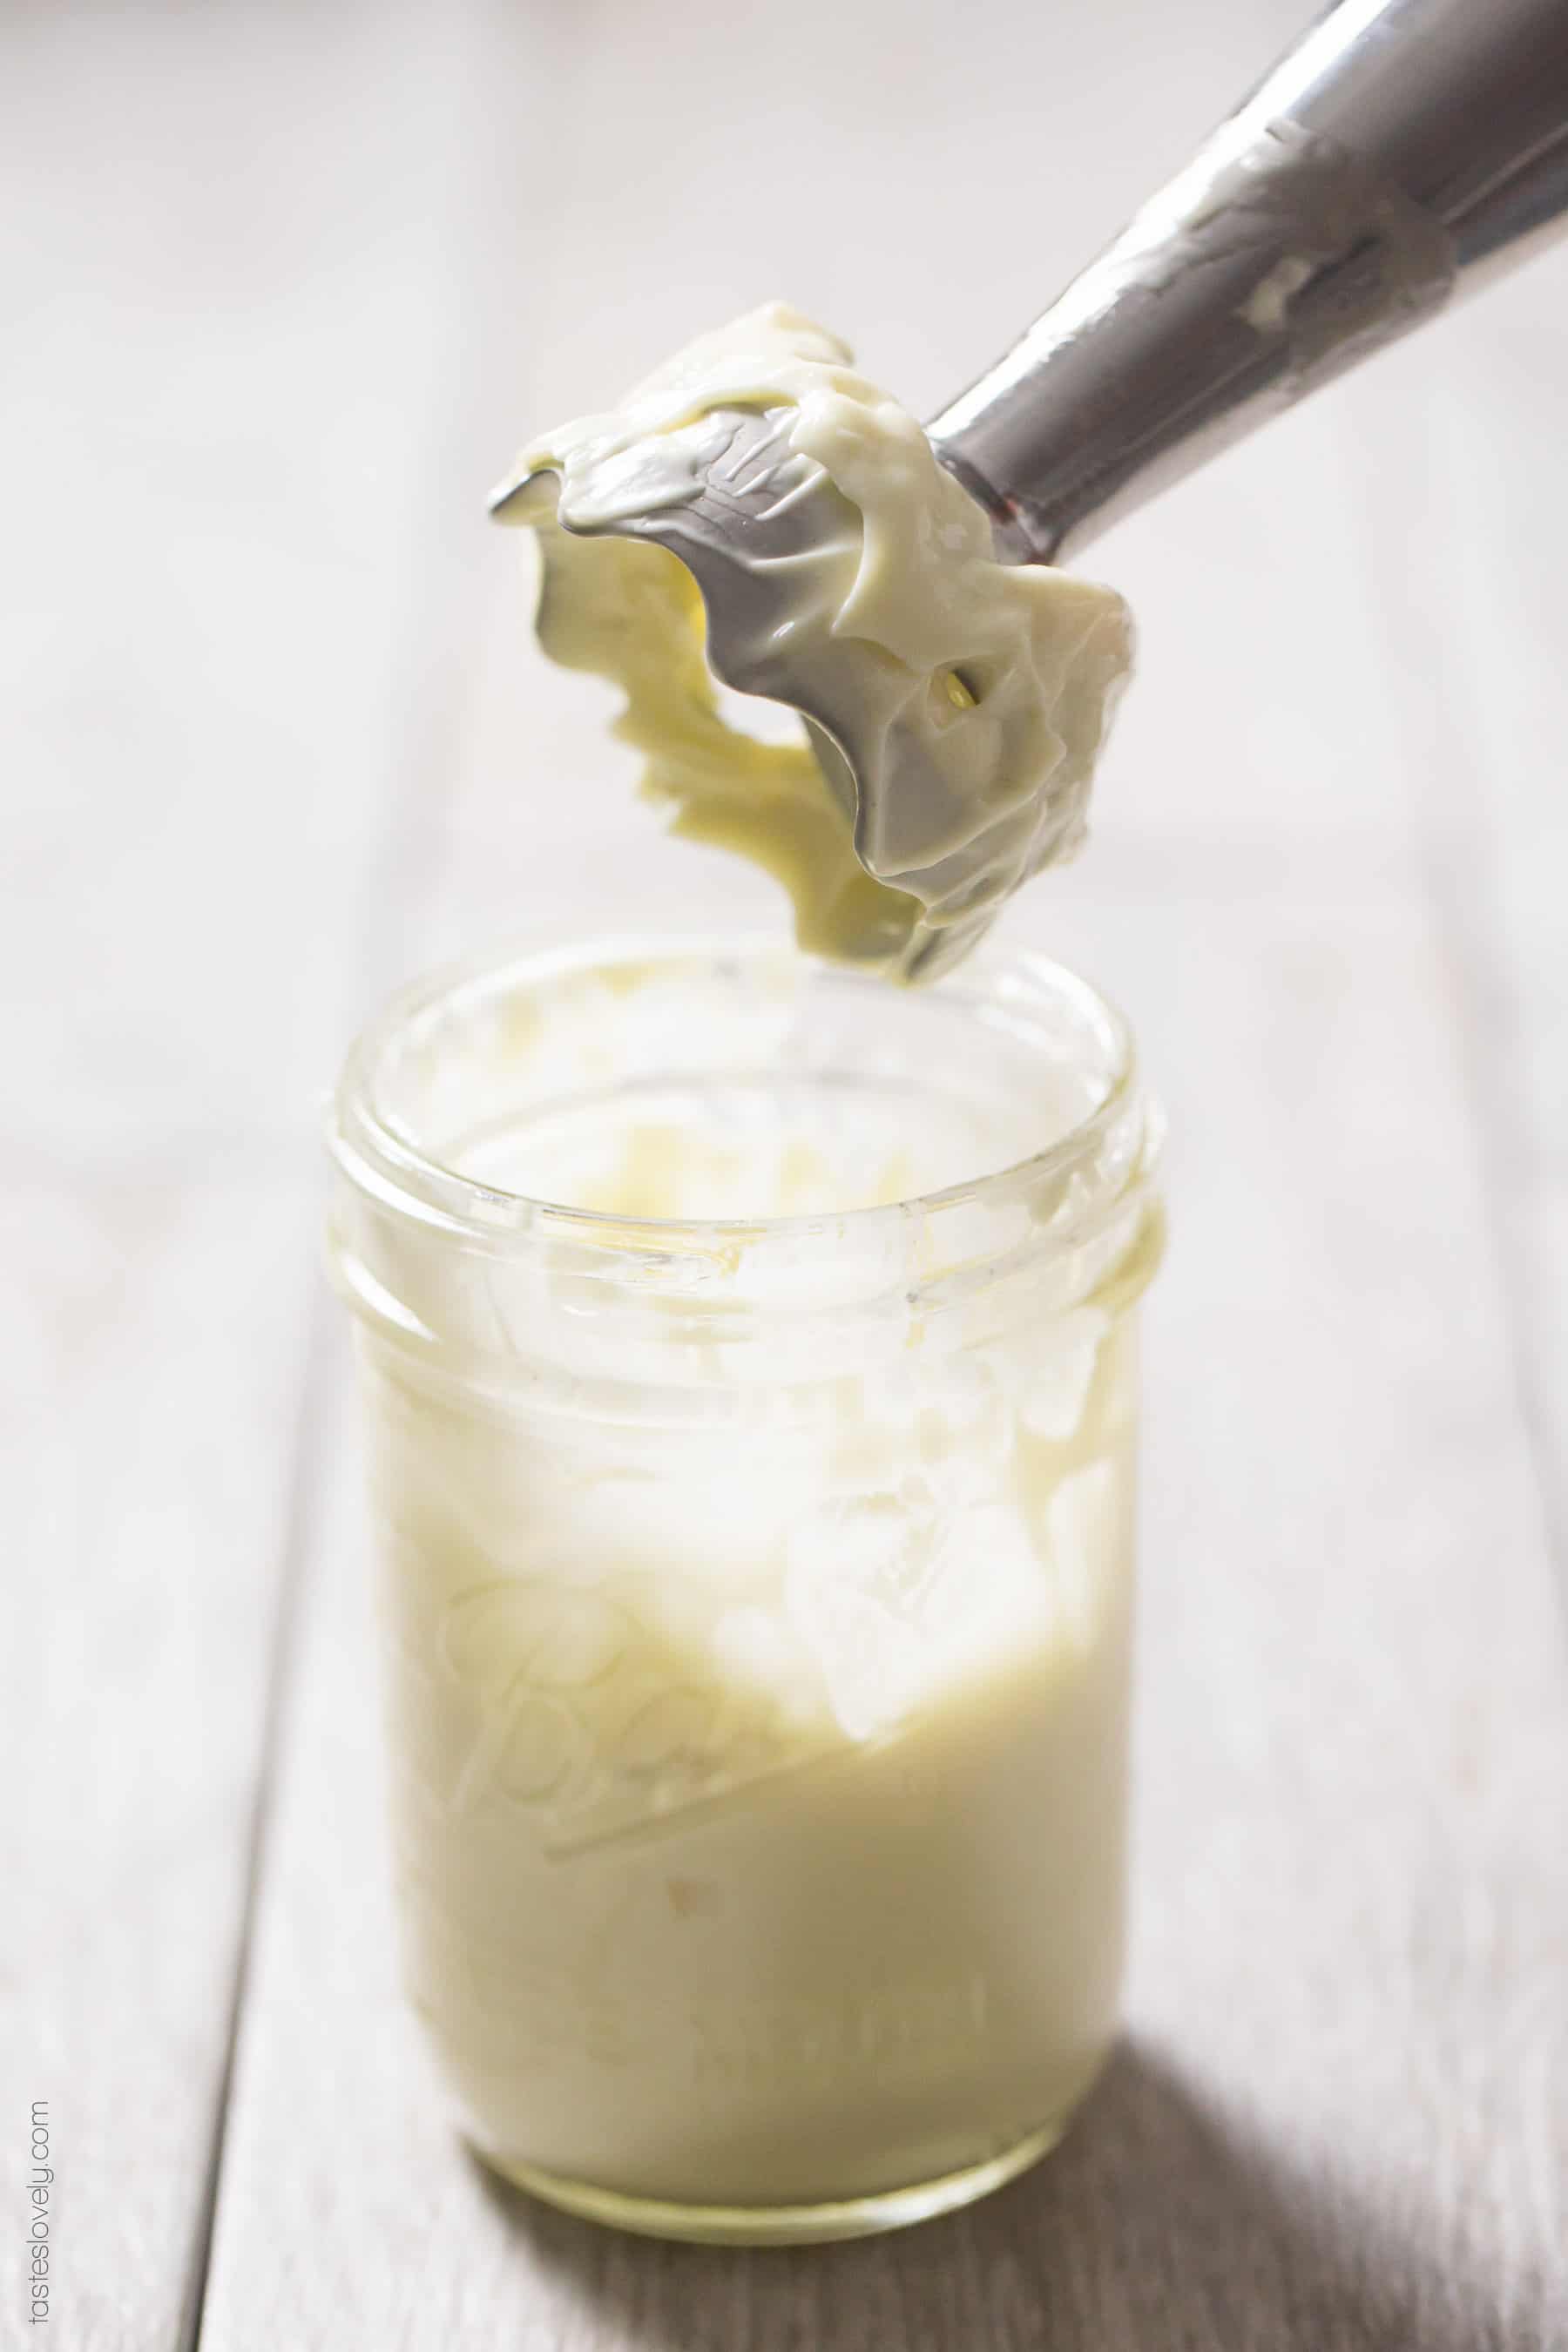 immersion blender and mason jar filled with mayonnaise